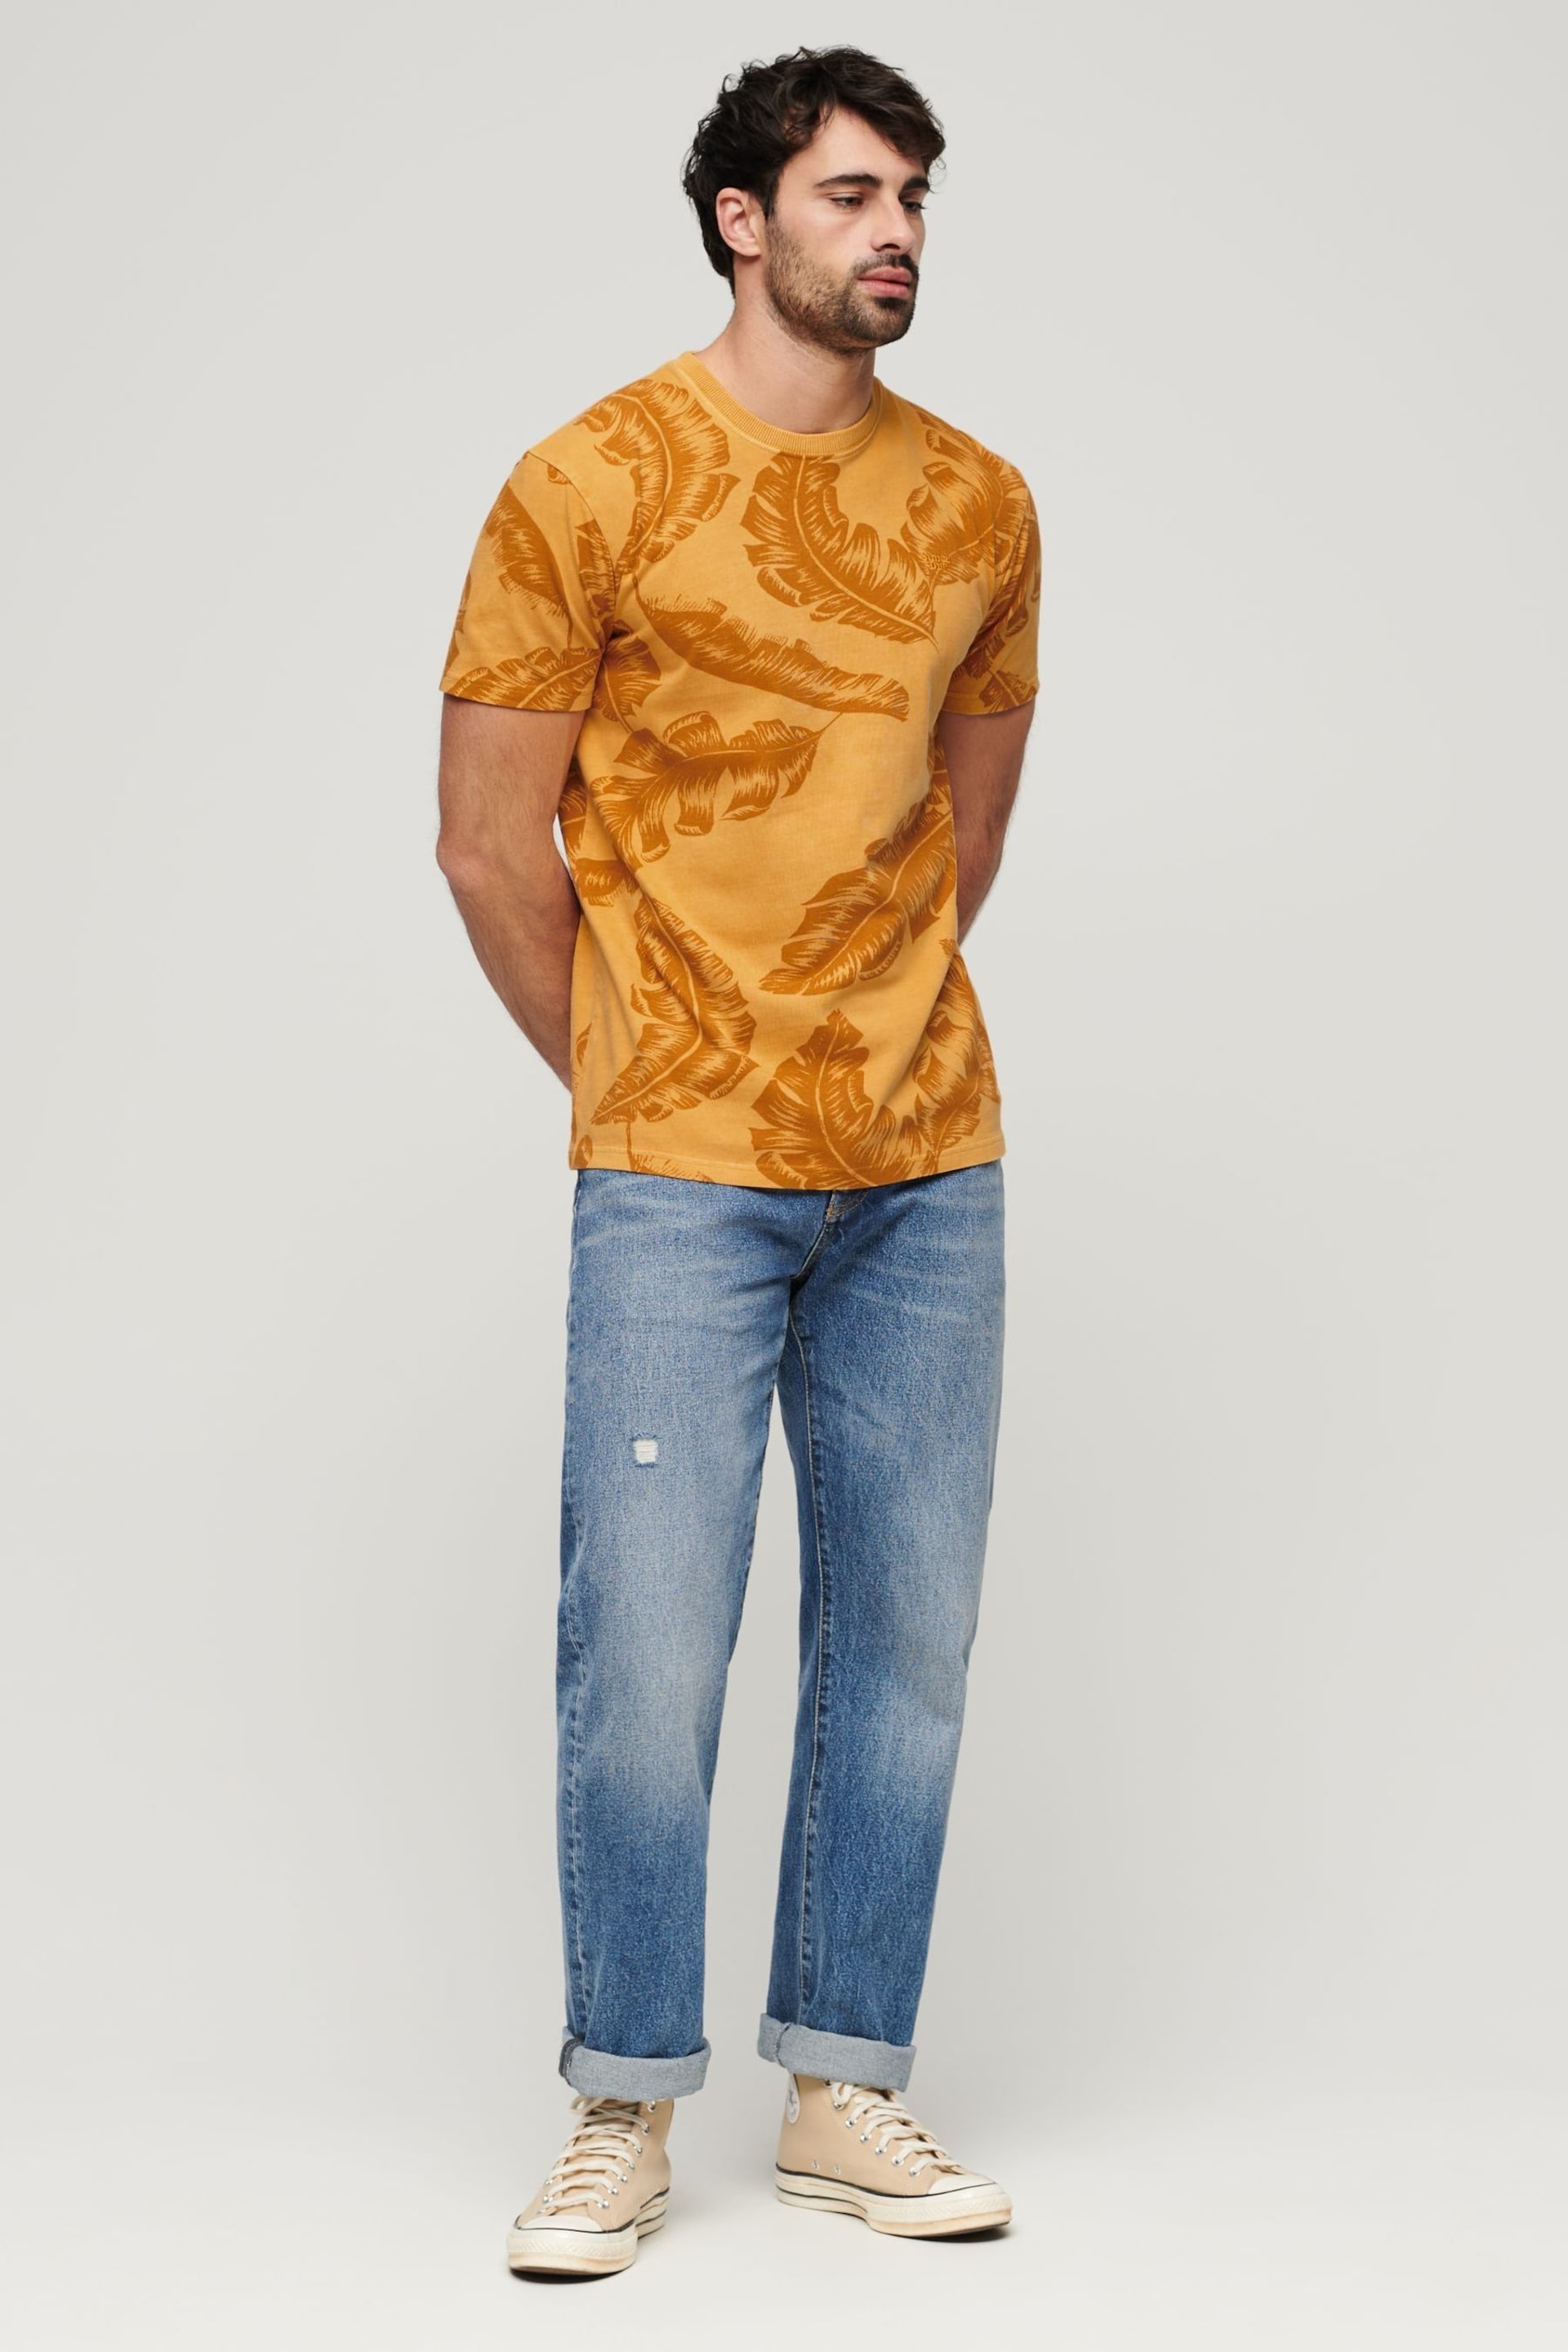 Superdry Yellow Vintage Overdye Printed T-Shirt - Image 2 of 6